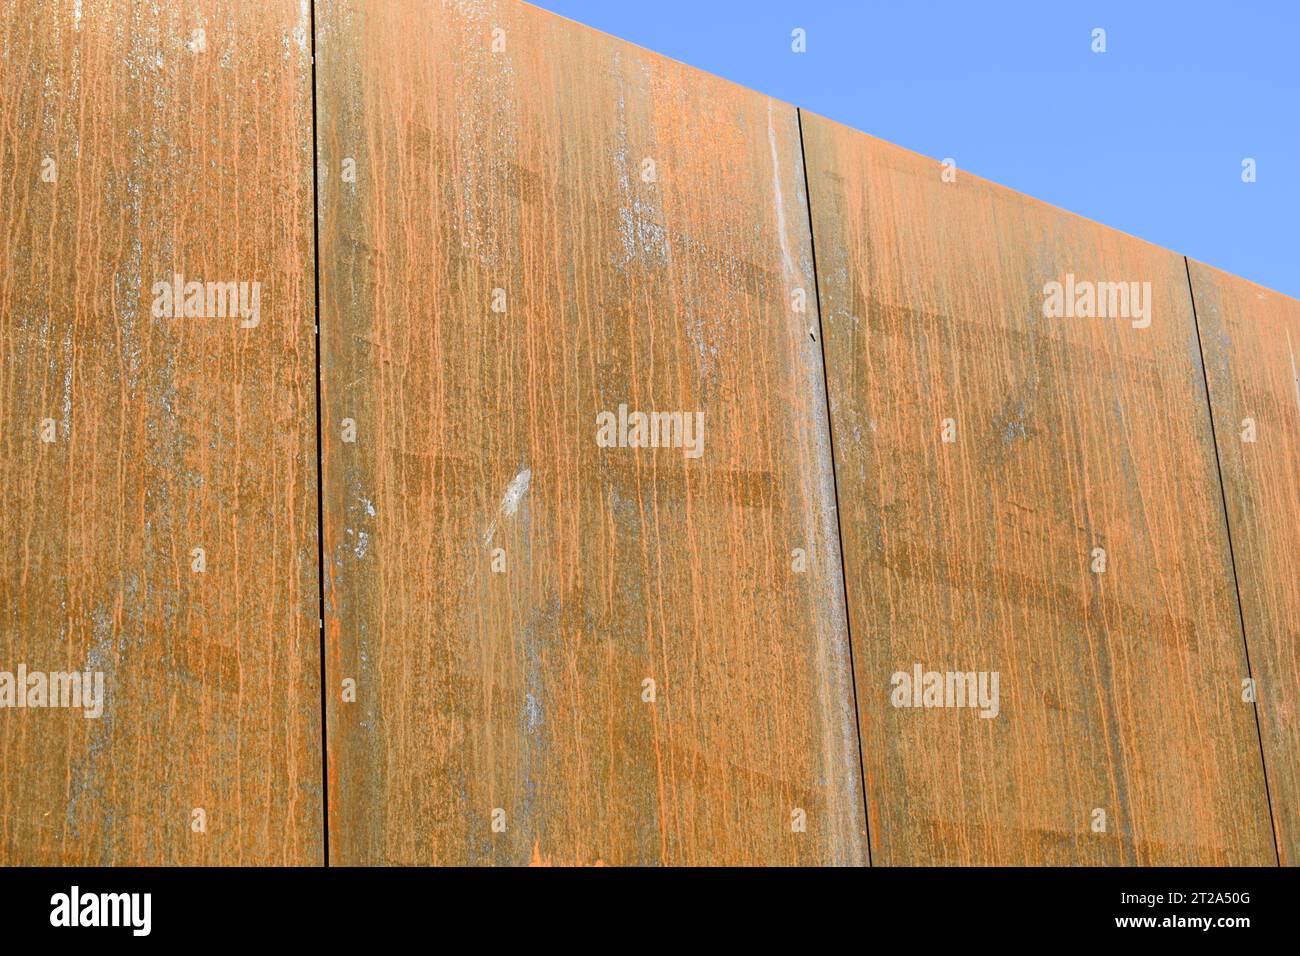 Rusty surface of weathering steel facade panels on the exterior of a building Stock Photo